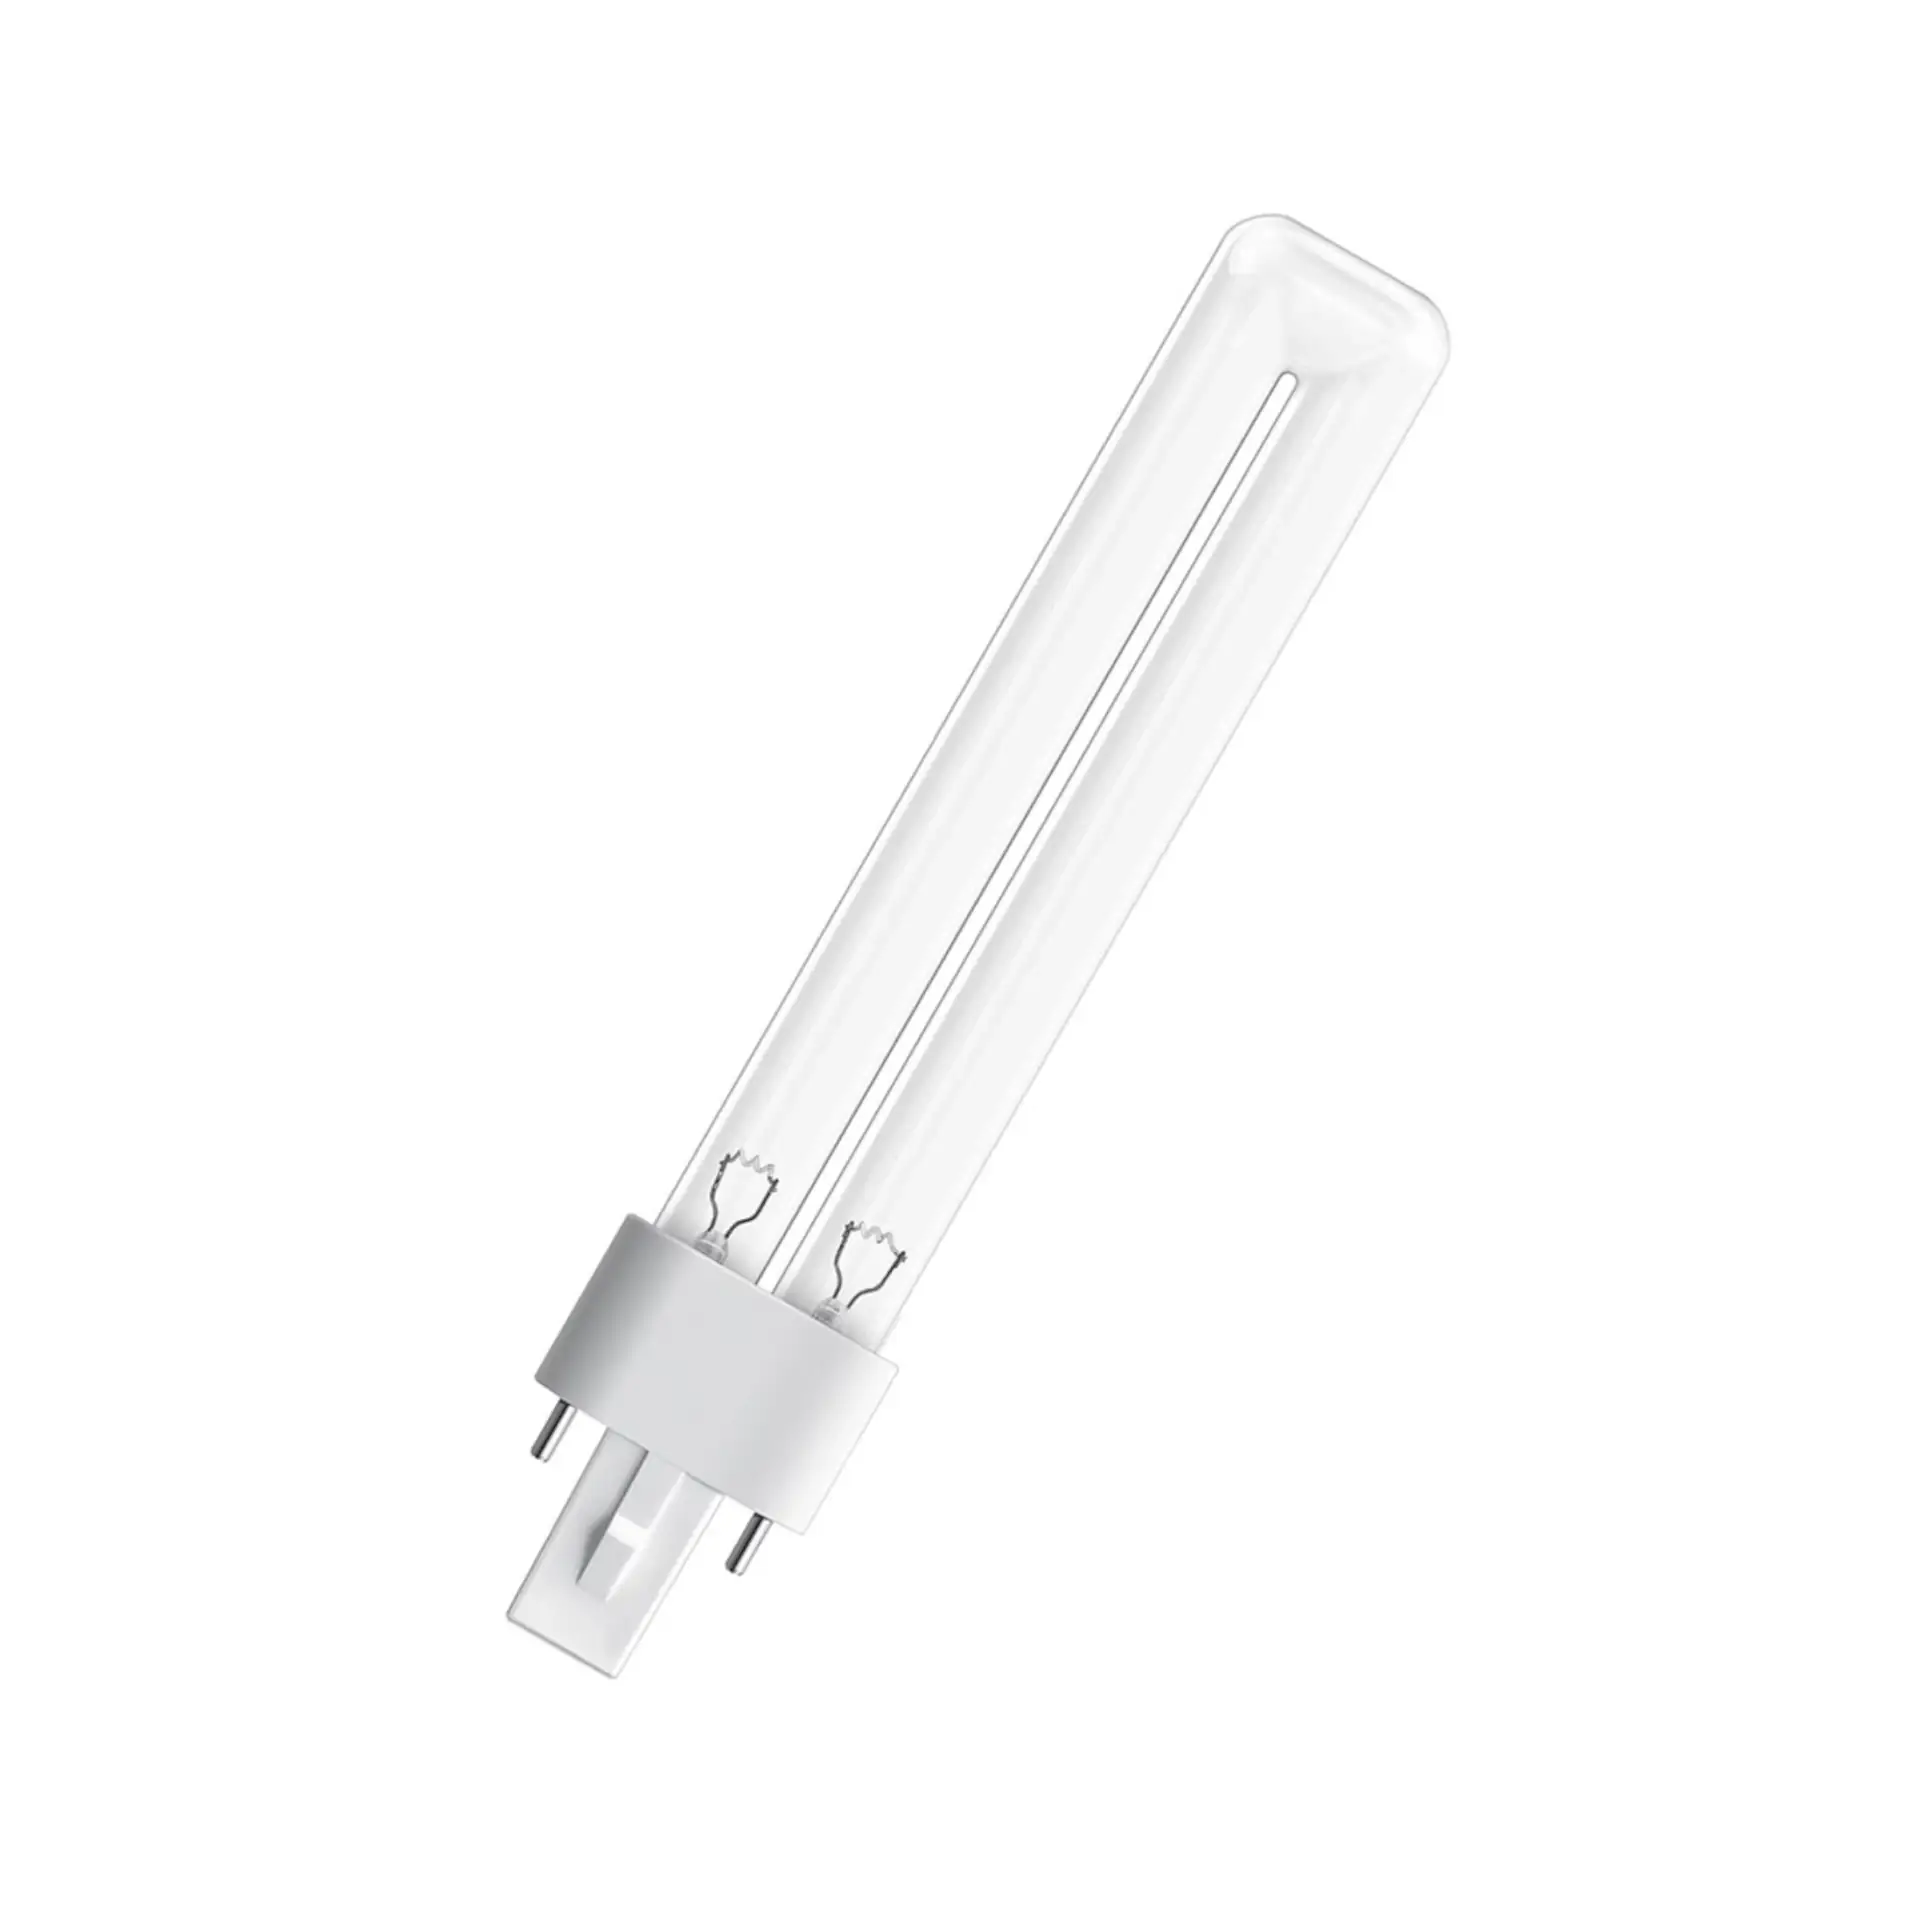 HNS S 11W G23Disinfection Lamps